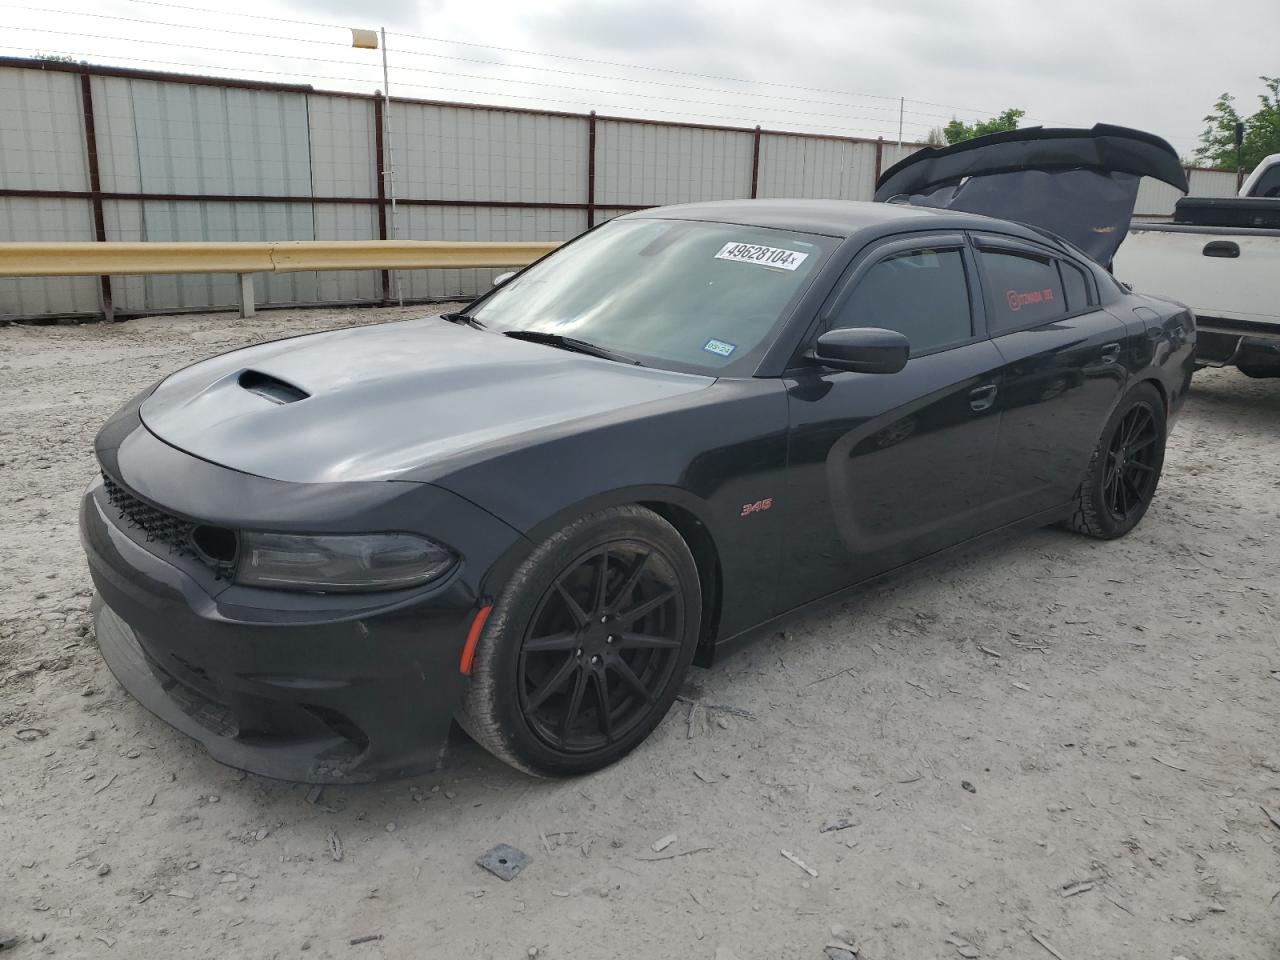 vin: 2C3CDXCT2FH825045 2C3CDXCT2FH825045 2015 dodge charger 5700 for Sale in 76052 3840, Tx - Ft. Worth, Haslet, Texas, USA